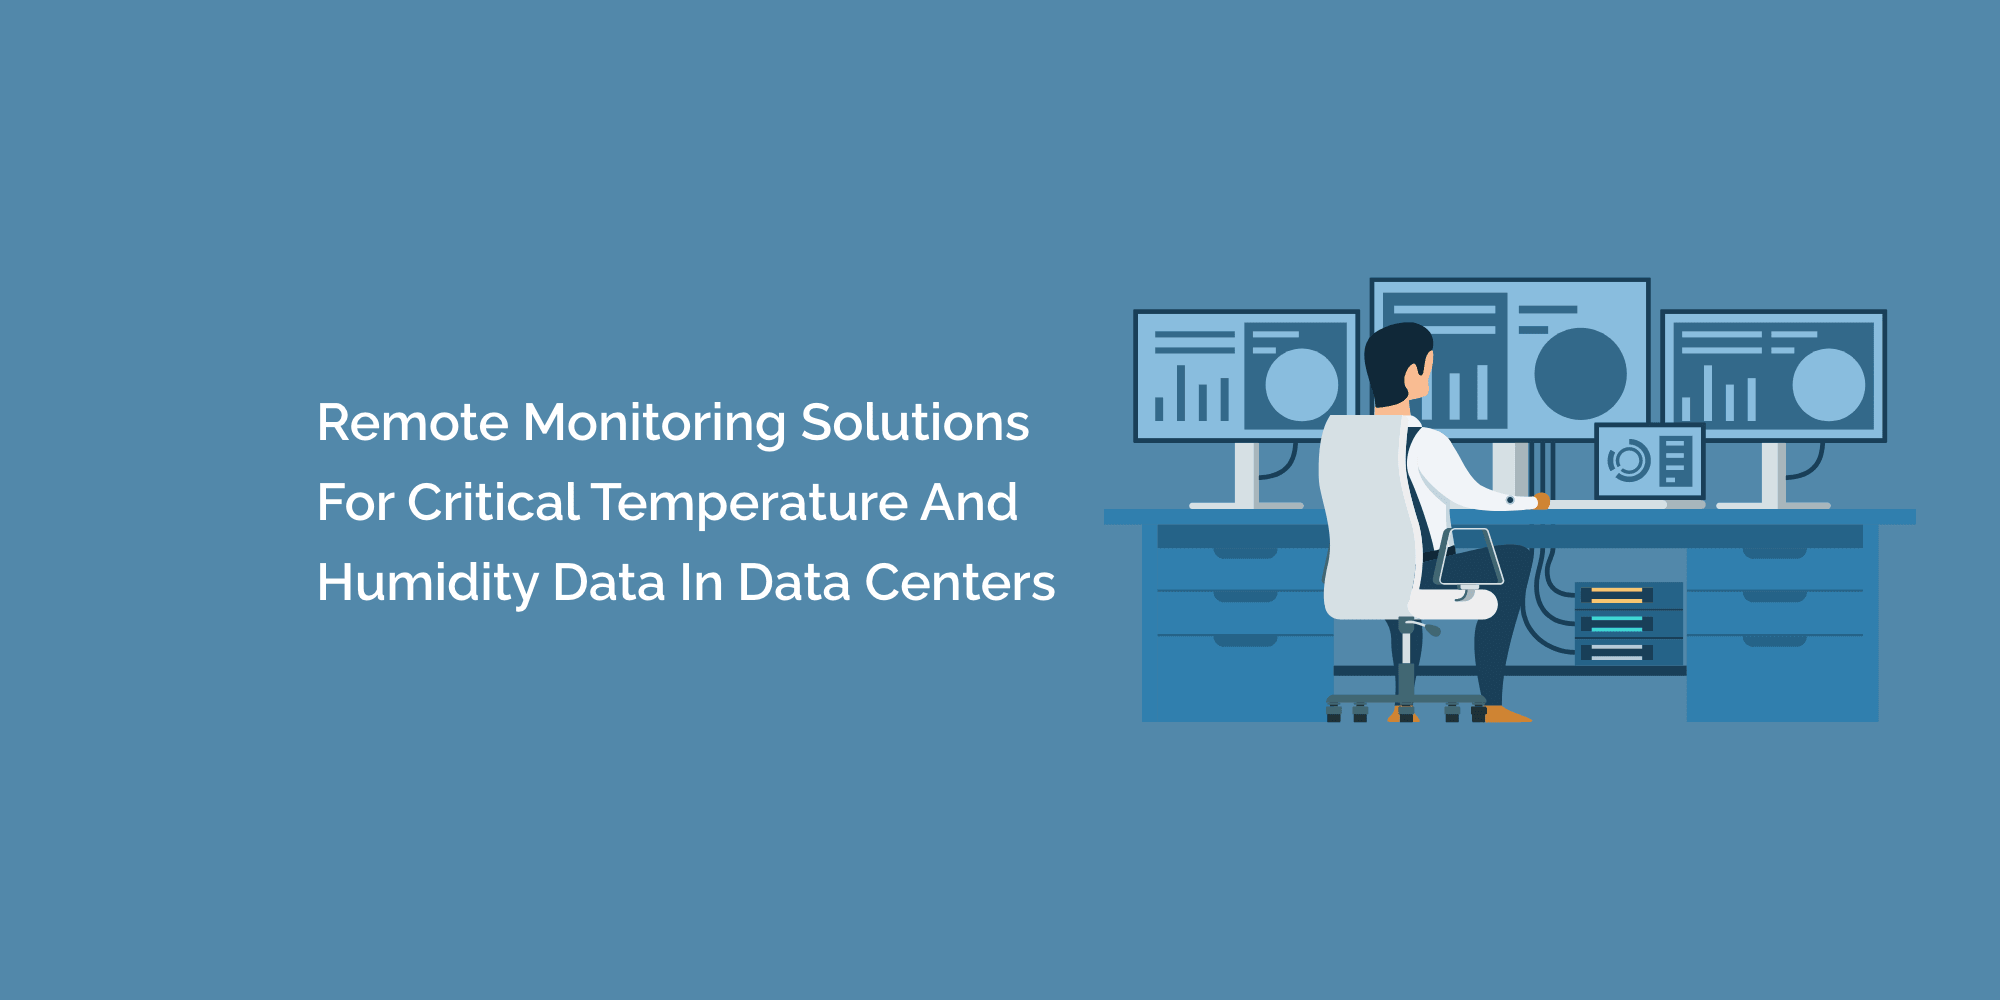 Remote Monitoring Solutions for Critical Temperature and Humidity Data in Data Centers